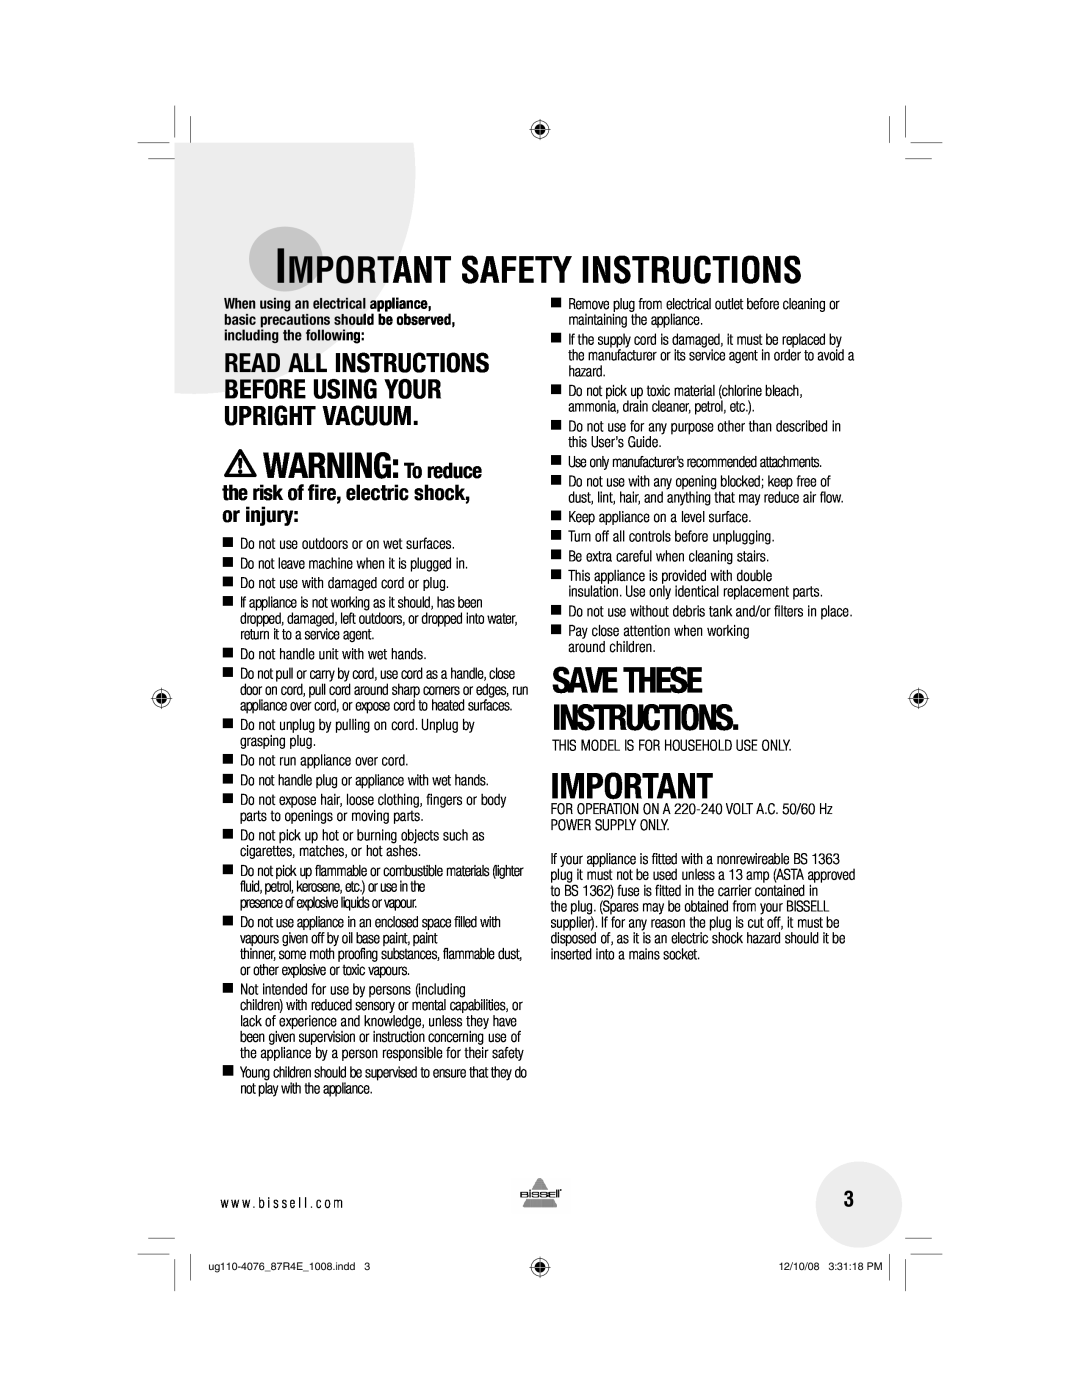 Bissell 87R4 warranty the risk of fire, electric shock, or injury, Important Safety Instructions, Save These Instructions 